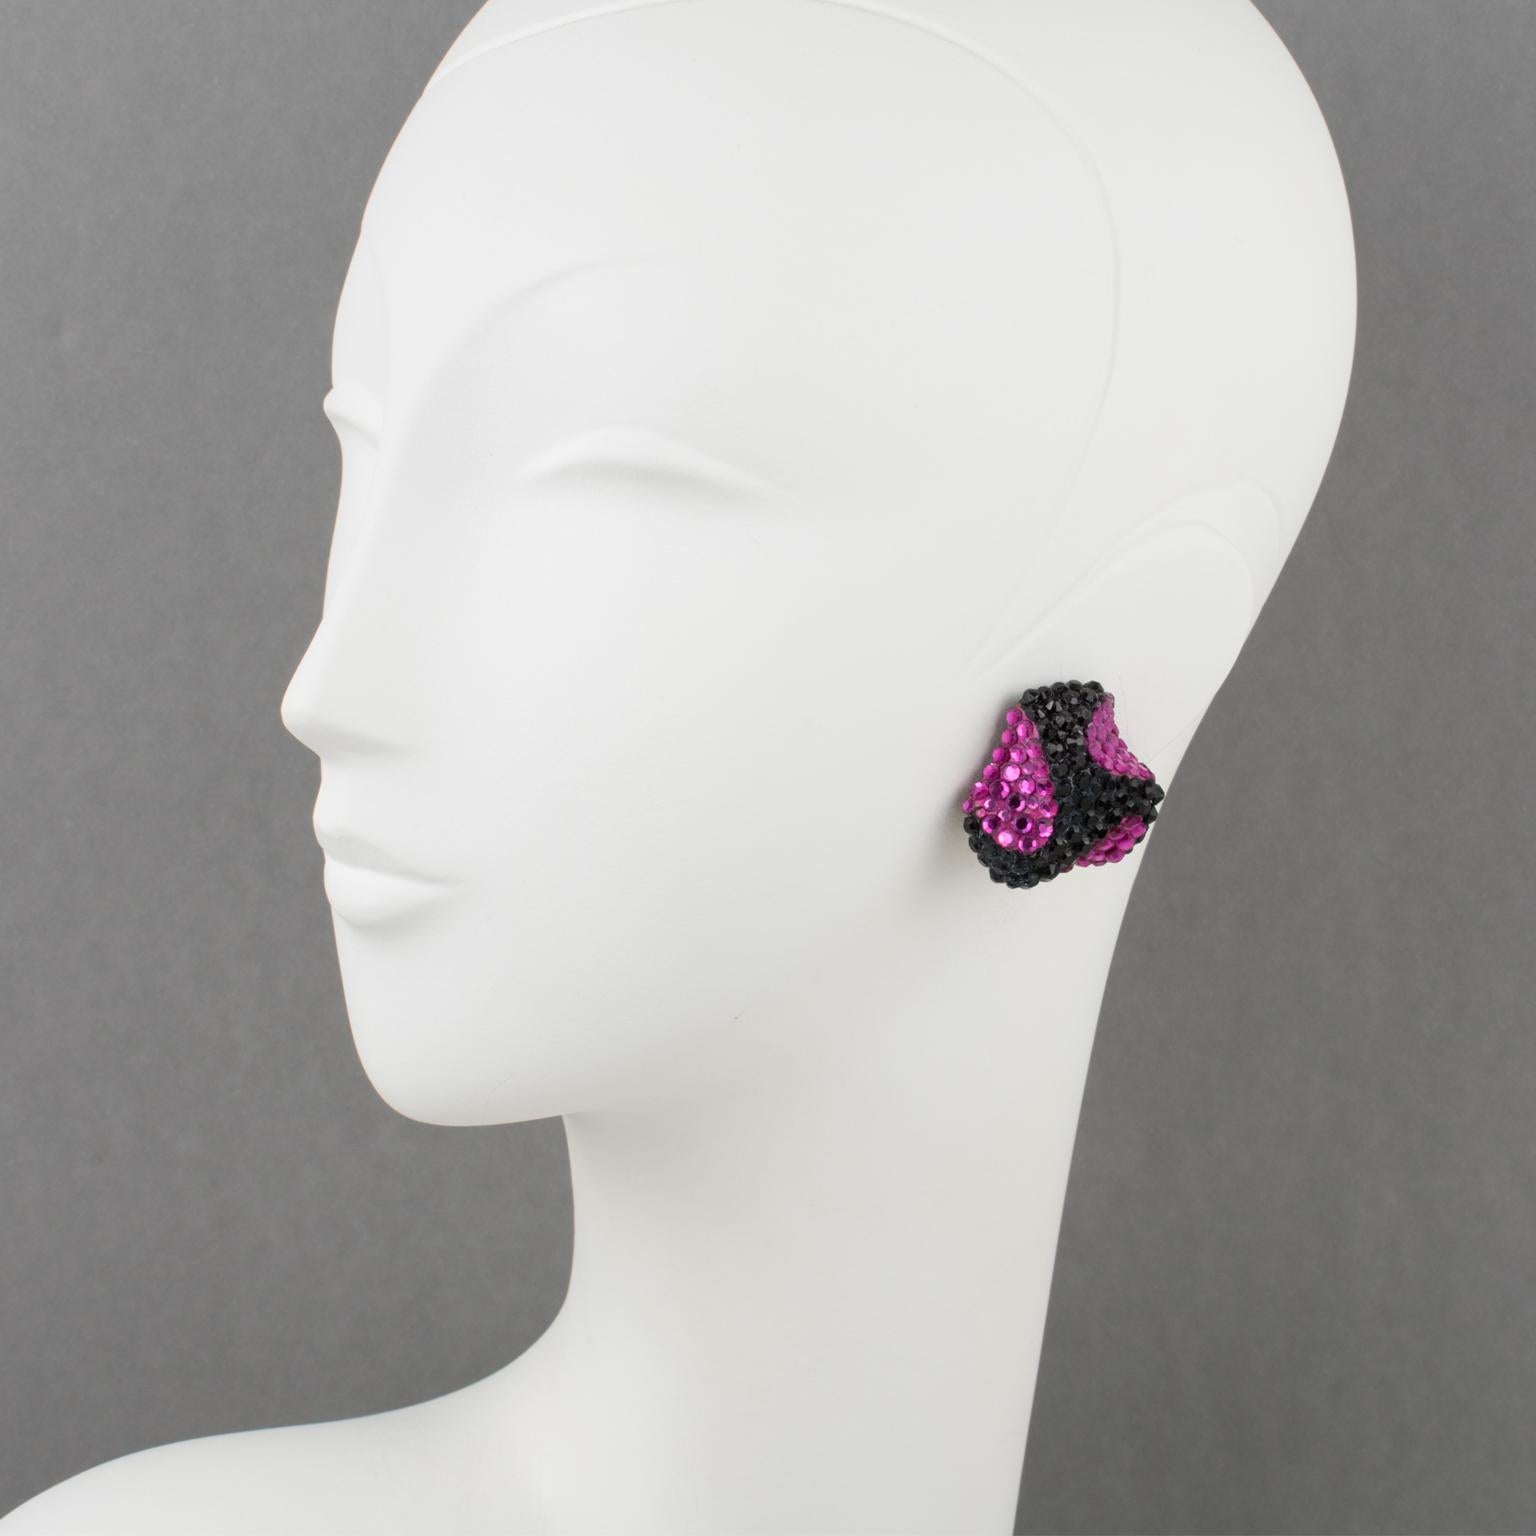 Richard Kerr designed these stunning statement clip-on earrings in the 1980s. They are made of his signature pave rhinestones and feature a dimensional triskelion shape covered with colorful crystal rhinestones on a black resin background framing.